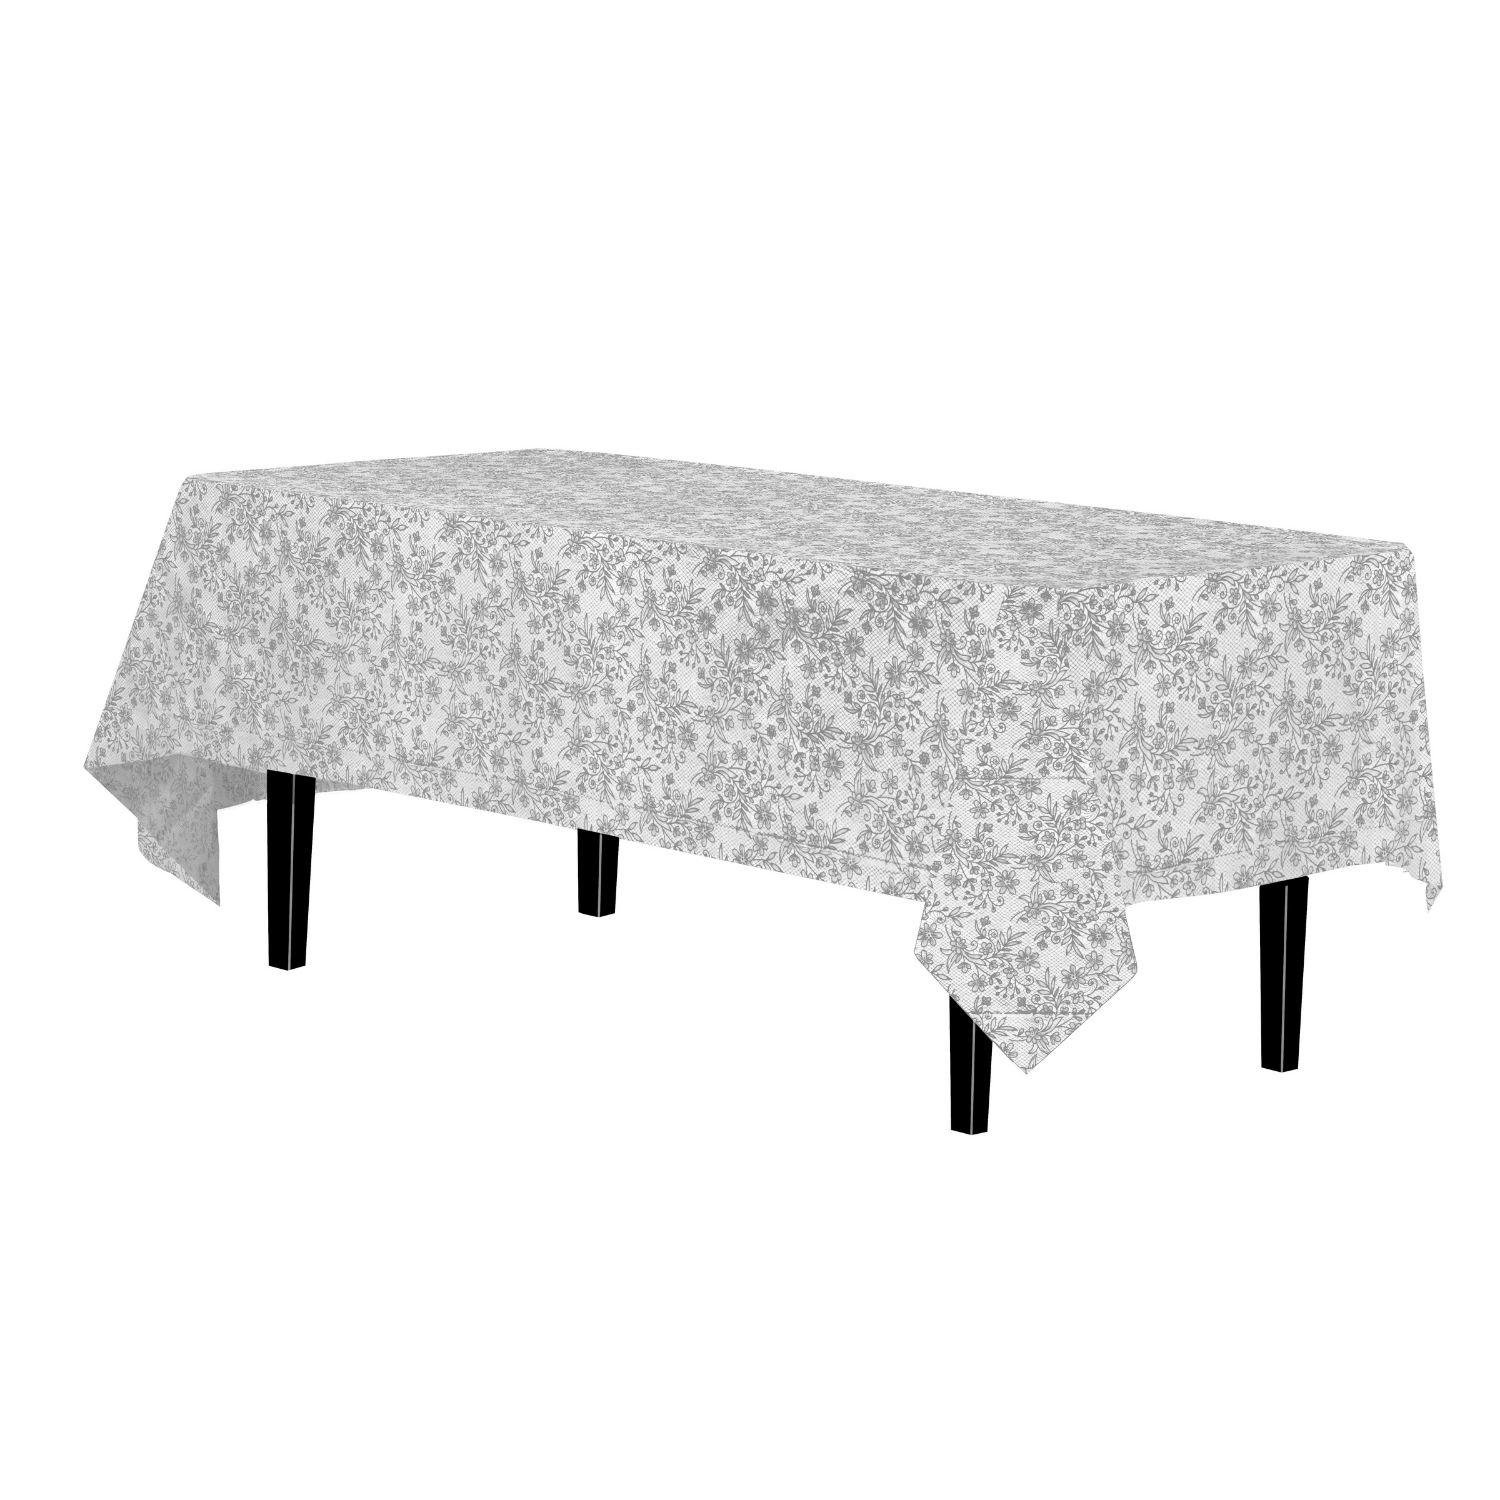 54" x 108" Wedding Style Disposable Plastic Table Cover Tablecloth Silver USA 